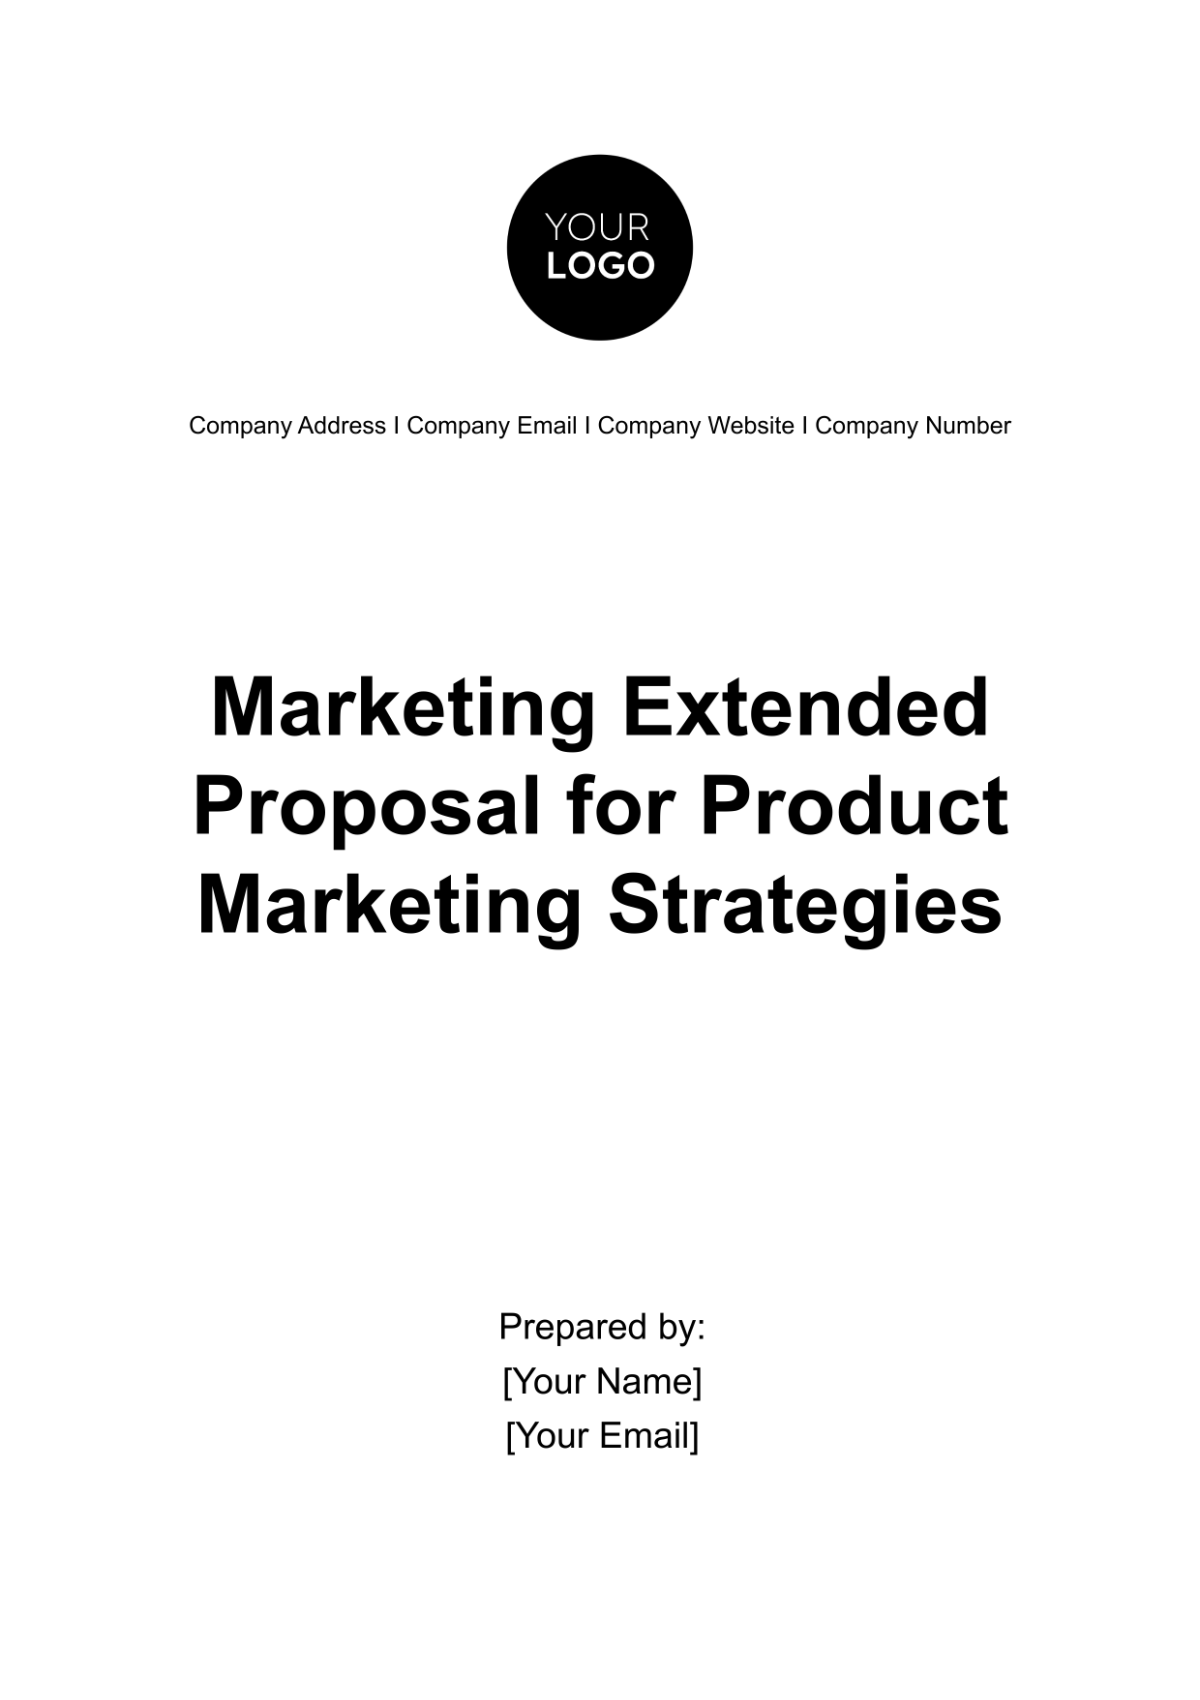 Free Marketing Extended Proposal for Product Marketing Strategies Template